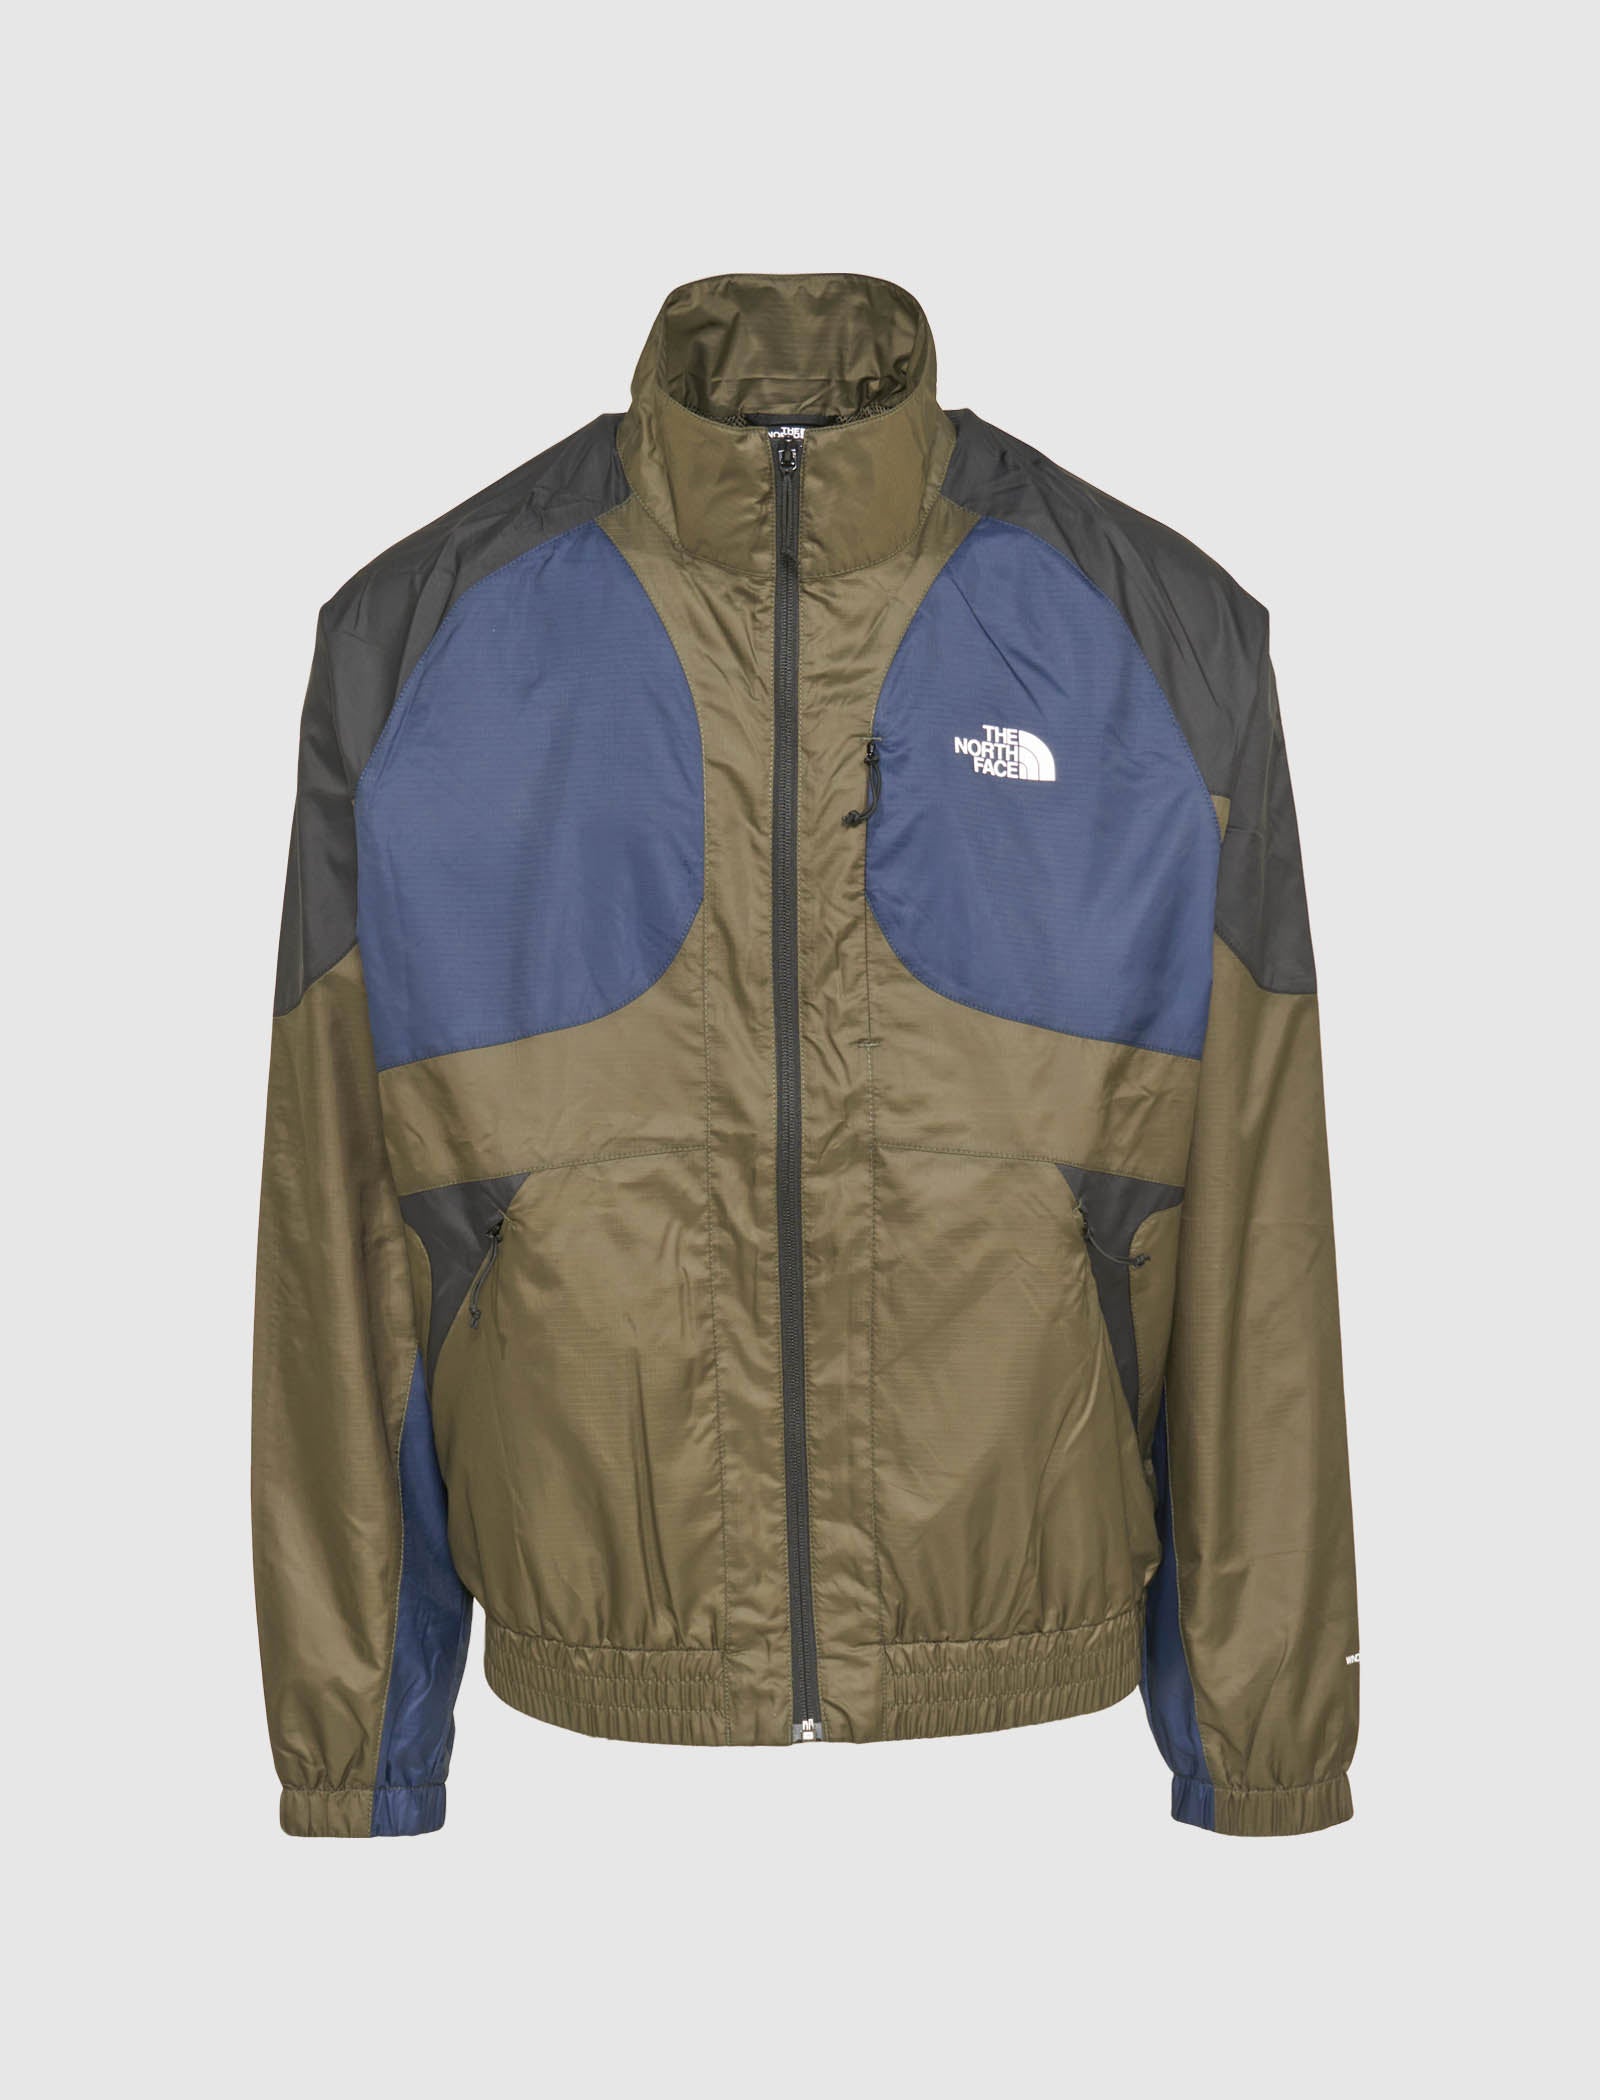 THE NORTH FACE TNF X JACKET